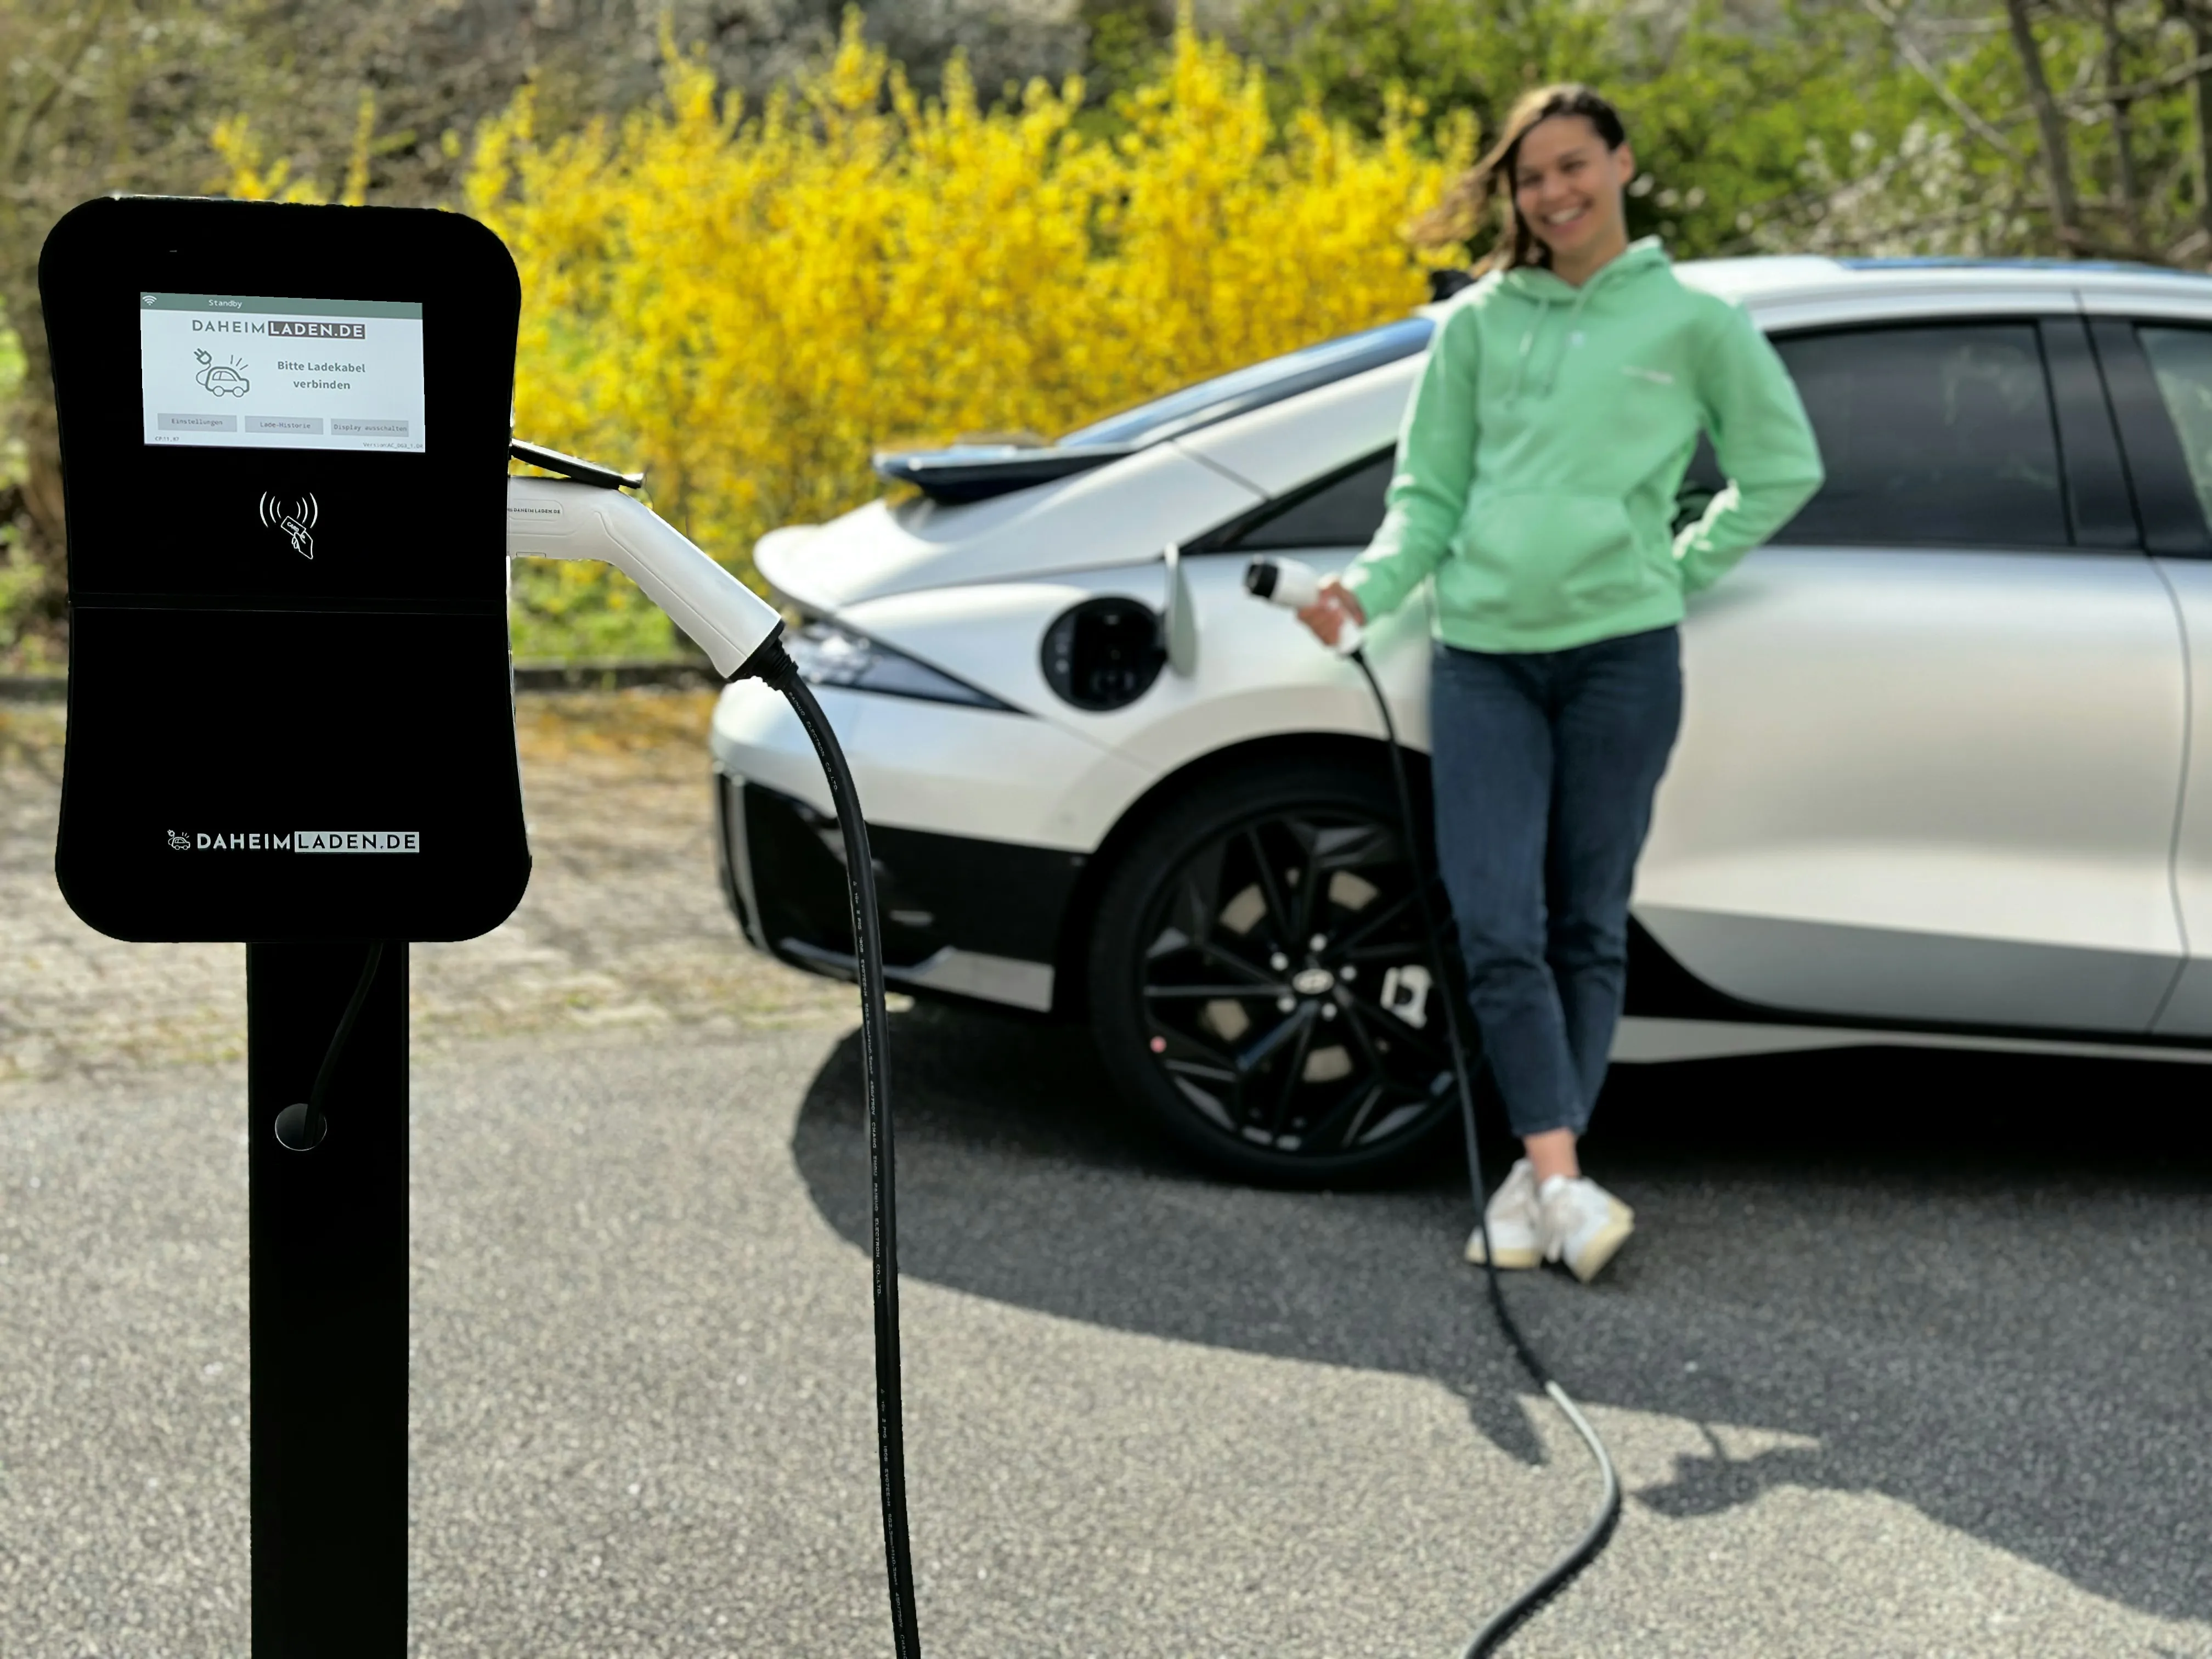 CIAL Introduces EV Charging Stations and Plans Hydrogen Fuel Station